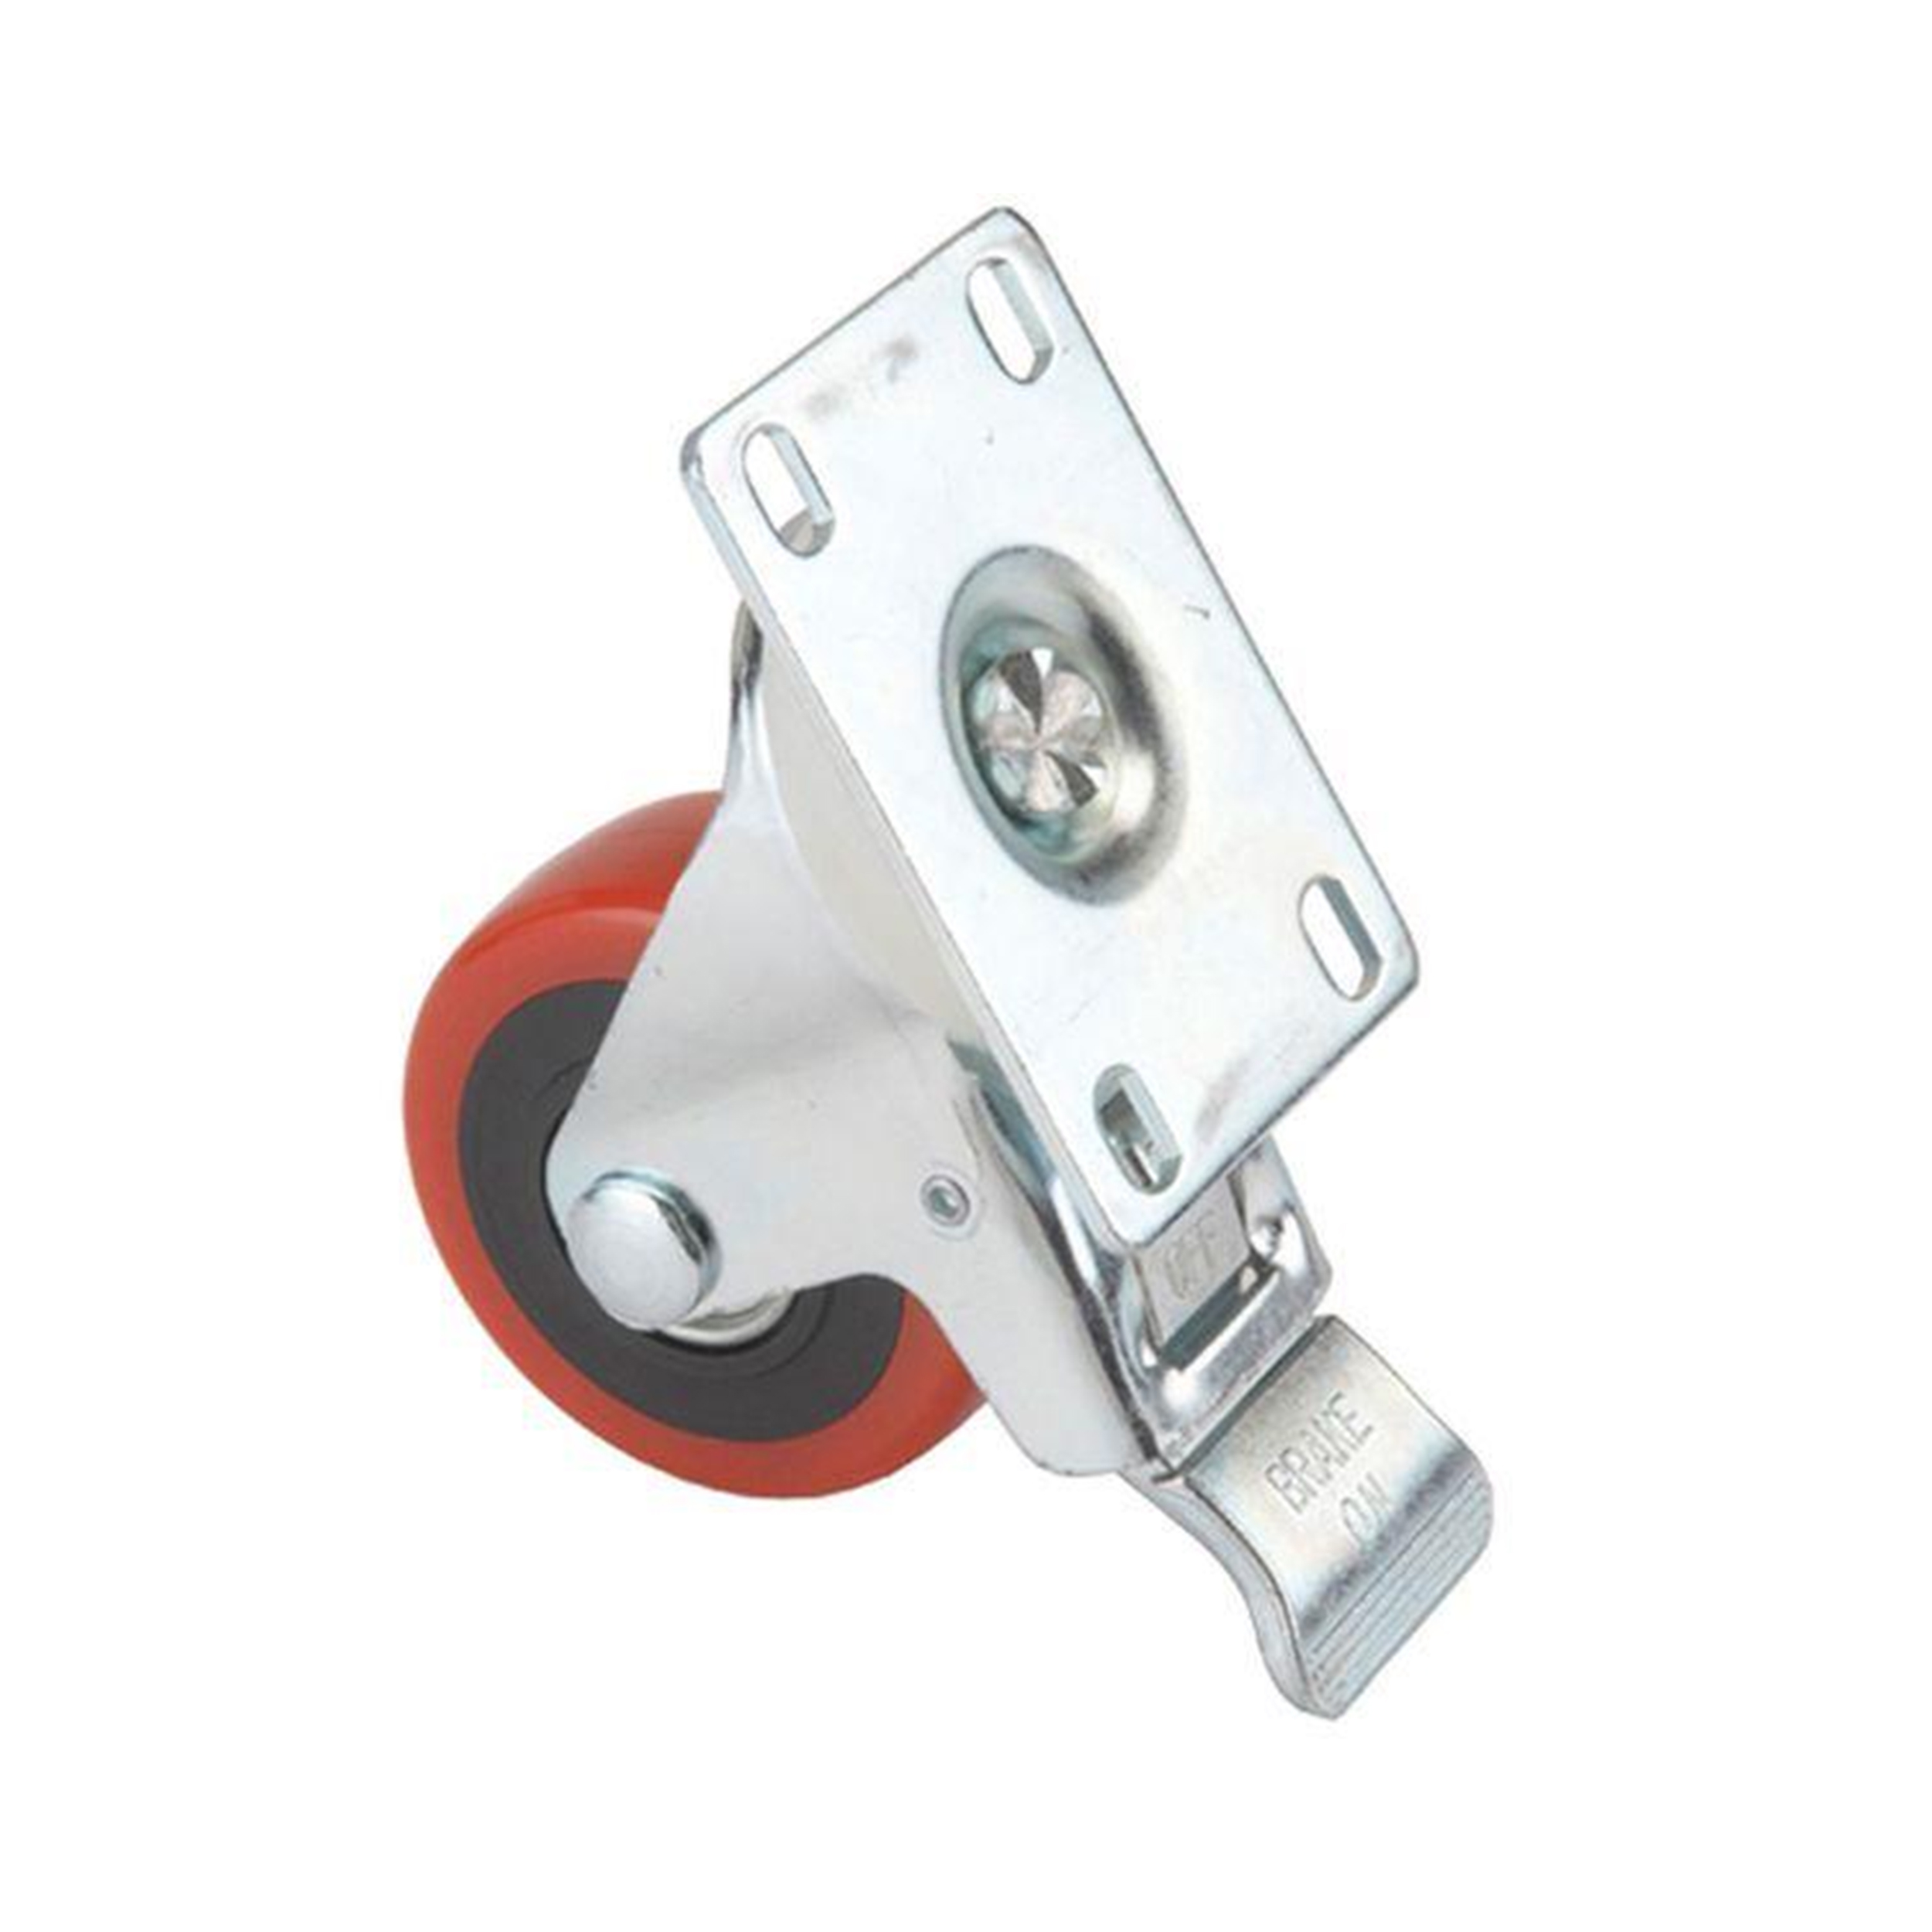 5" Caster, Double Locking, Swiveling With 4 Hole Mounting Plate